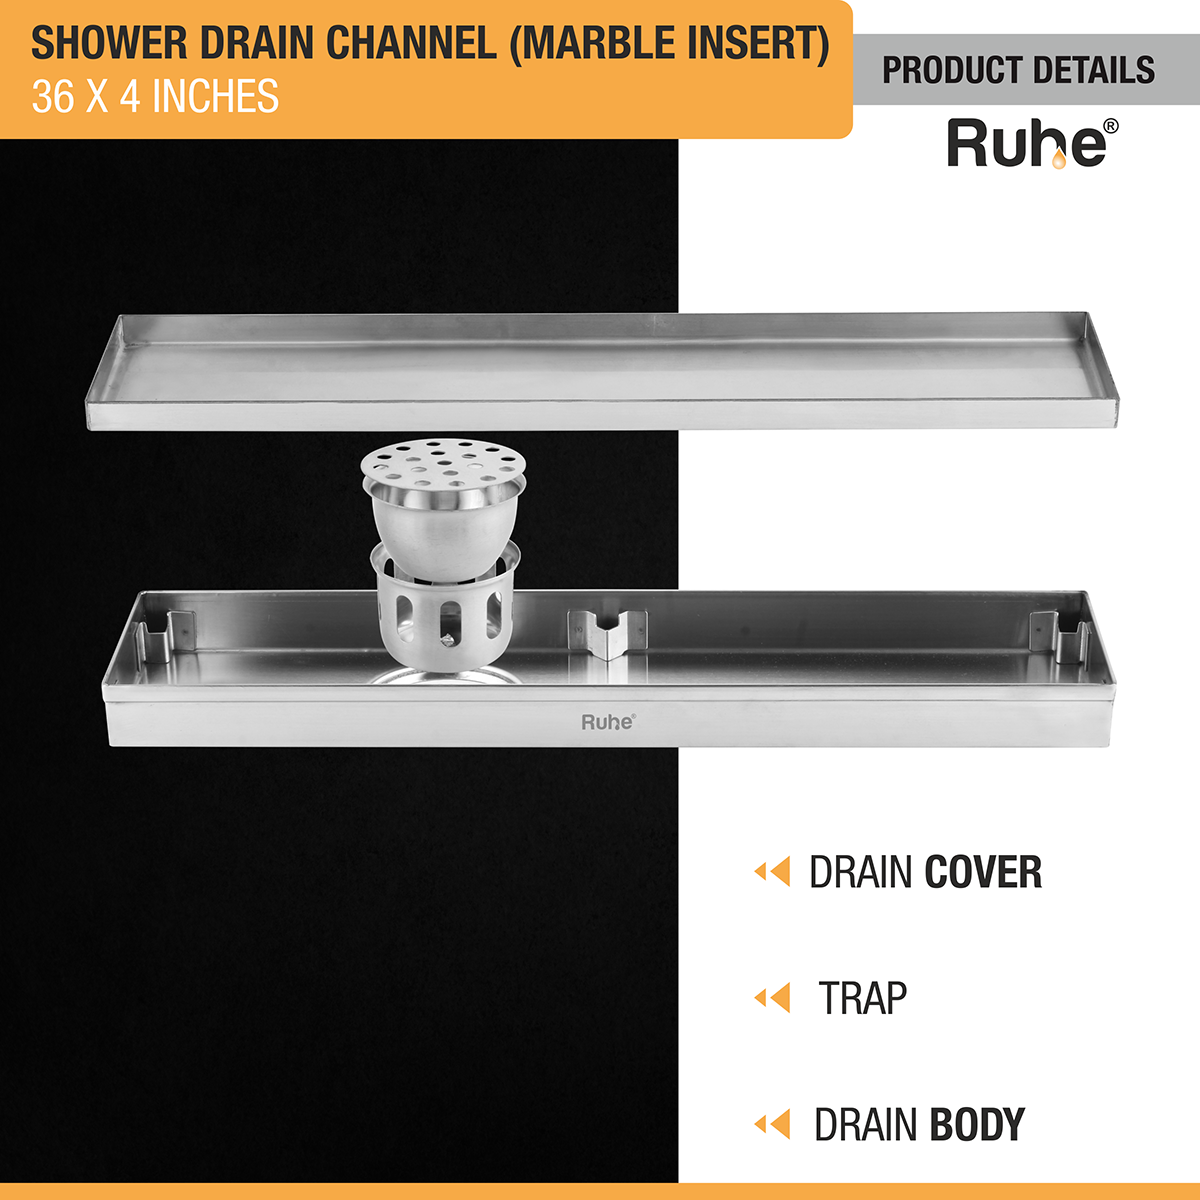 Marble Insert Shower Drain Channel (36 x 4 Inches) with Cockroach Trap (304 Grade) product details